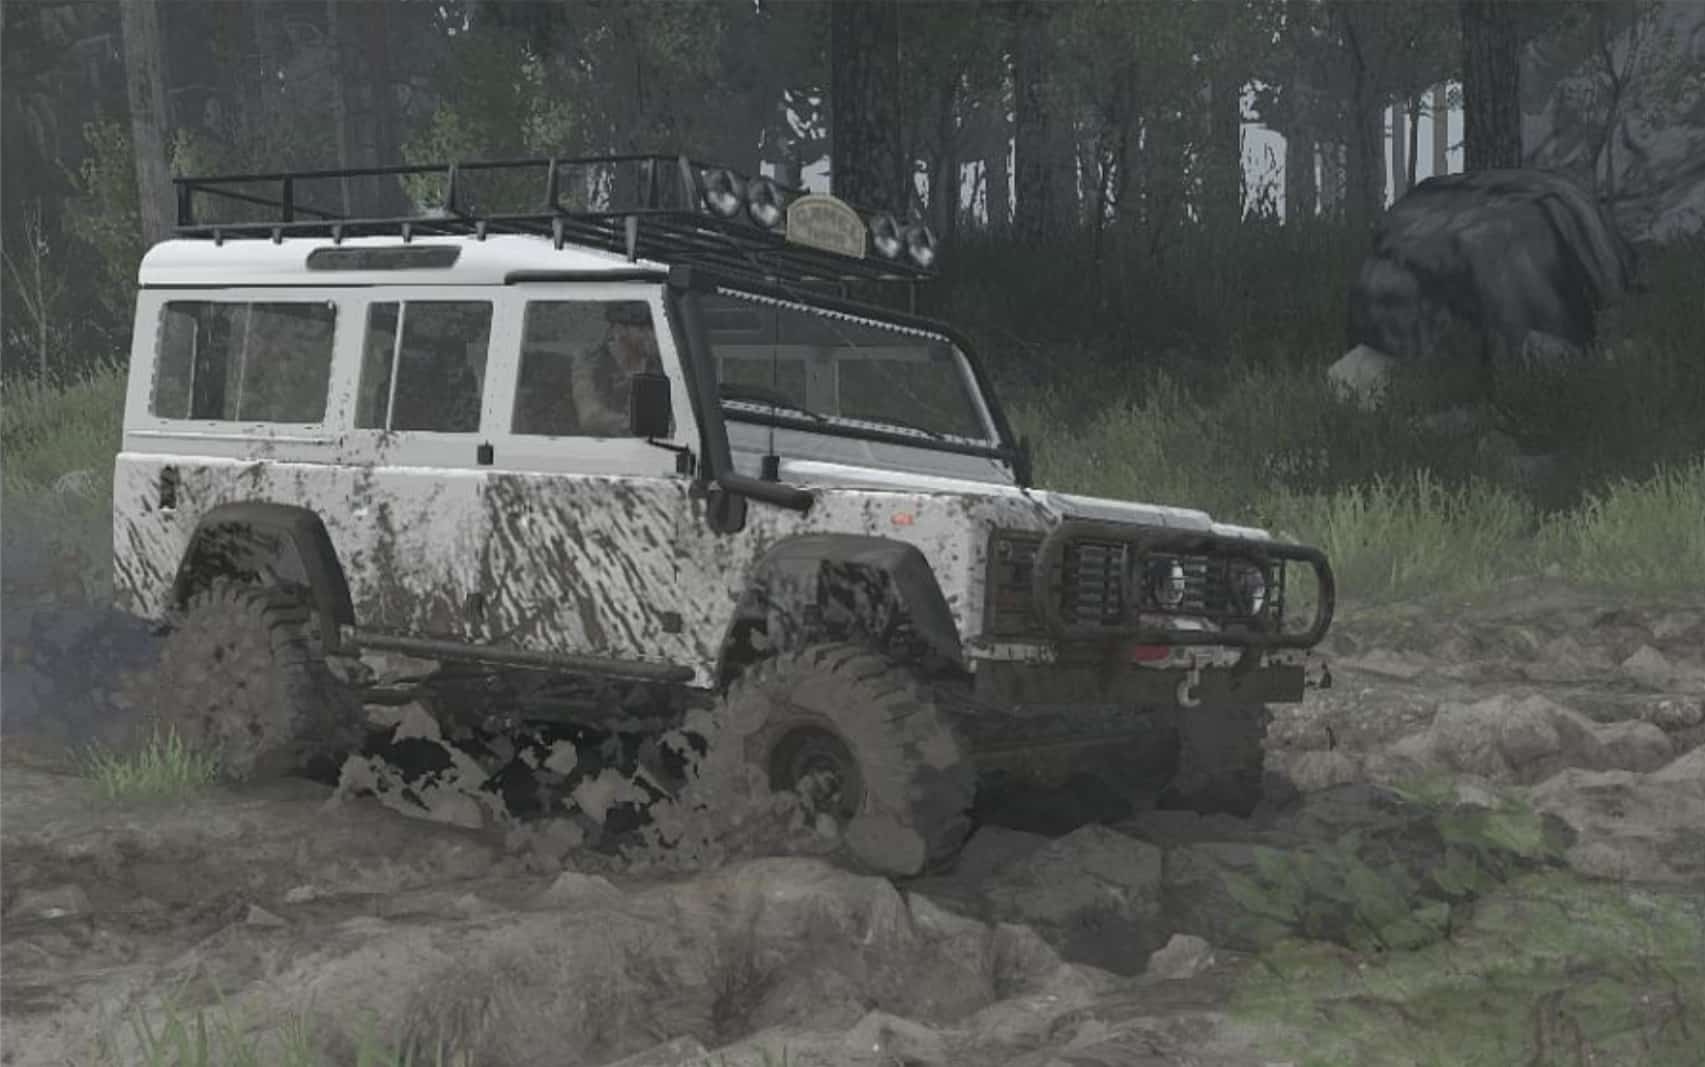 Expeditions a mudrunner game чит. Дефендер 2020 для Spin Tires Mud Runner. Ленд Ровер для Spin Tires. Land Rover Defender спринтрес мудранер. Ford Expedition для Spin Tires MUDRUNNER.